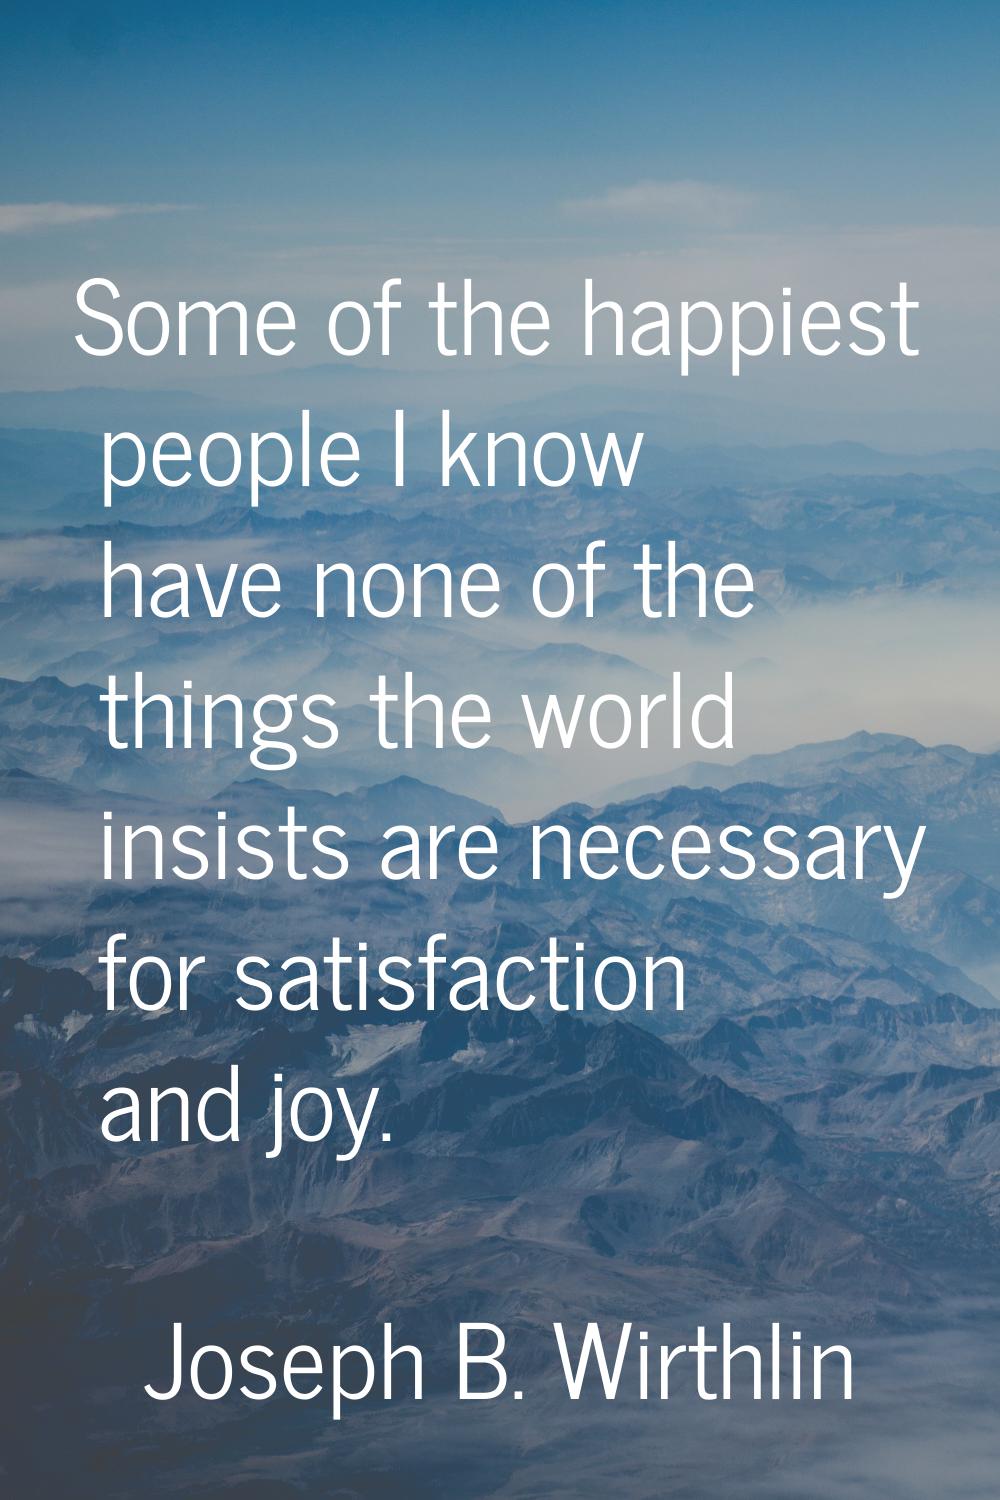 Some of the happiest people I know have none of the things the world insists are necessary for sati